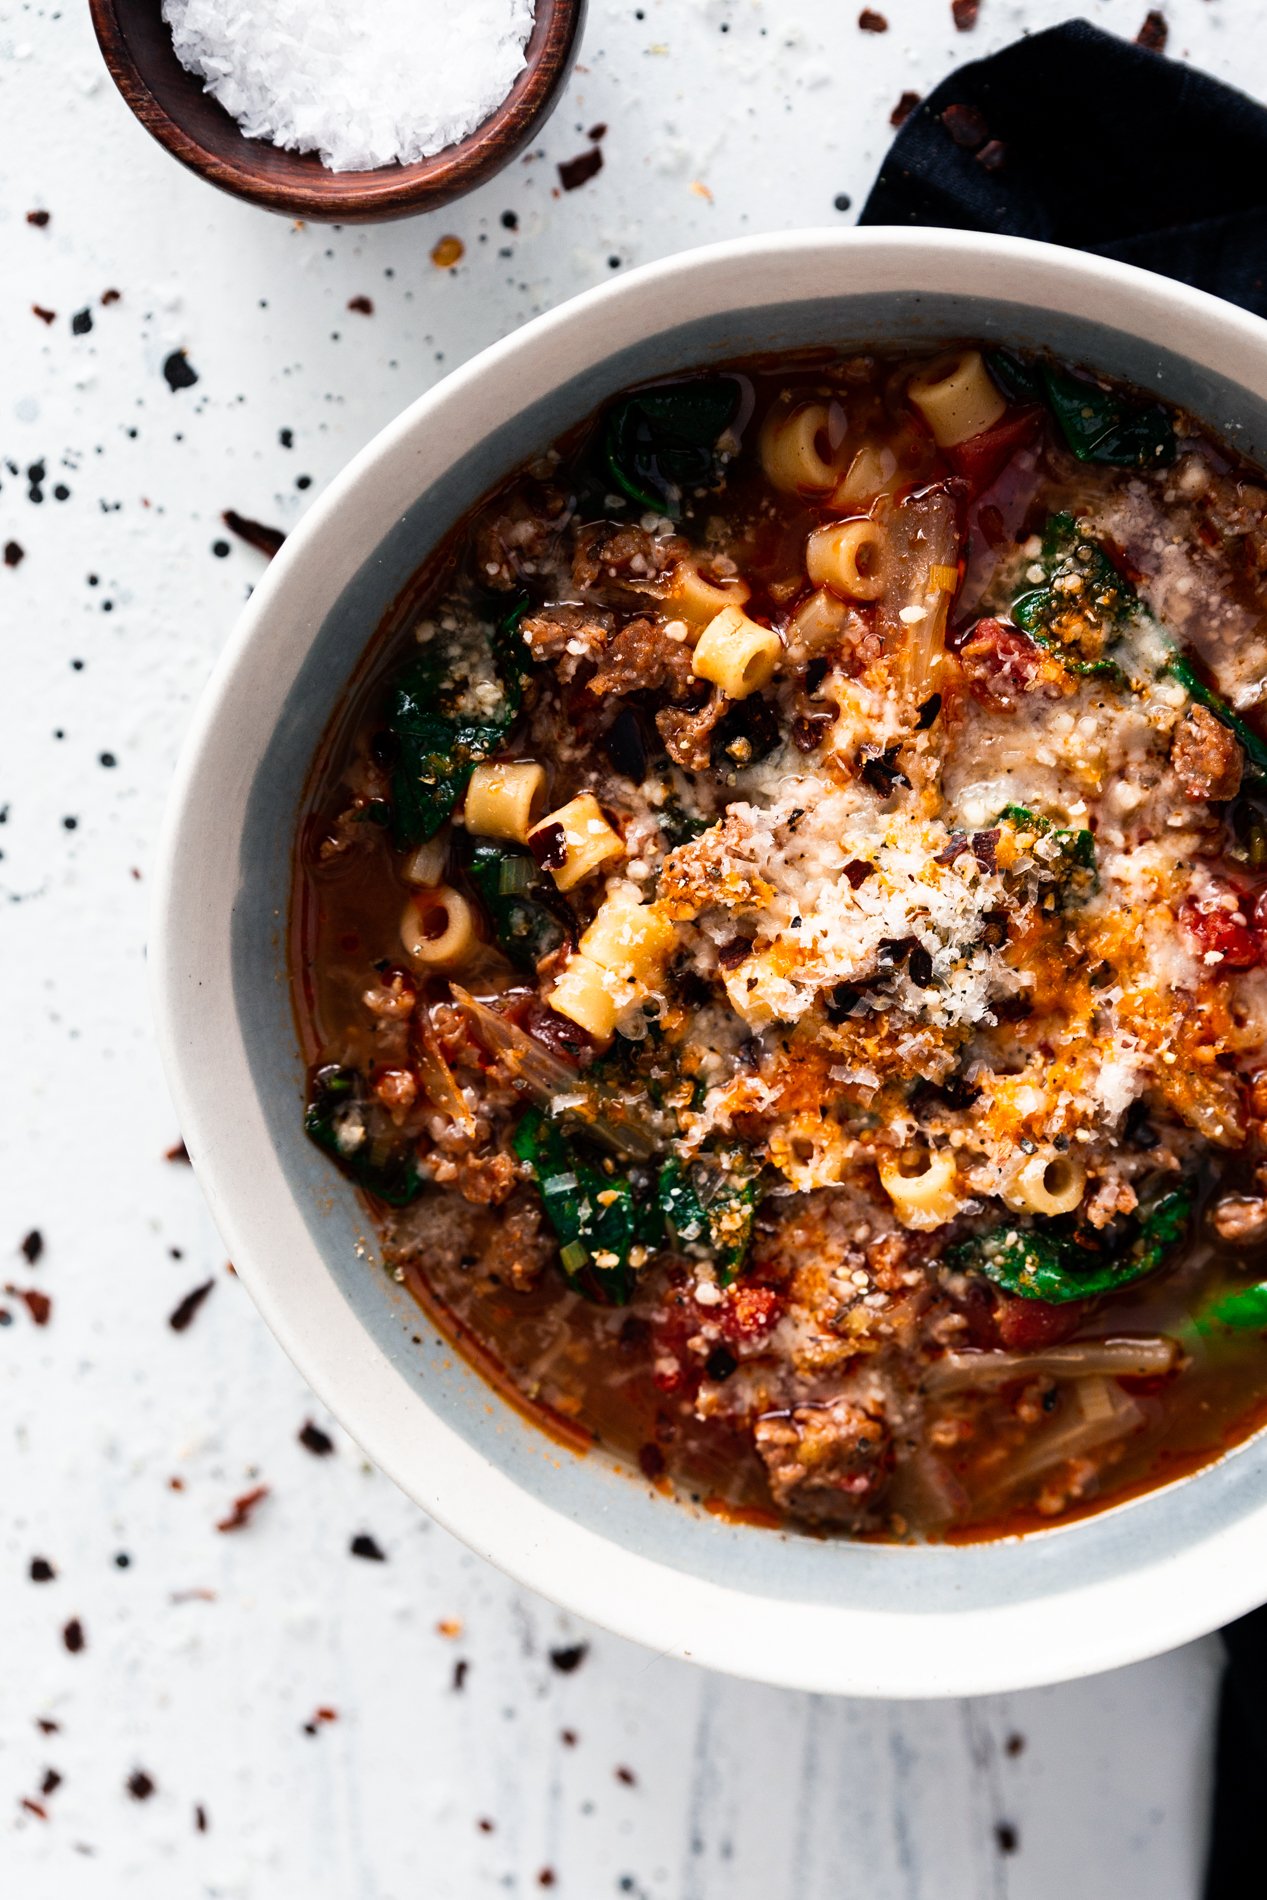 From Minneapolis food blogger A Simple Pantry, this Italian Sausage Soup with Spinach, Pasta, and Caramelized Fennel comes together in under an hour, a perfect weeknight dinner! Simmered in a tomato-laden broth and finished with ditalini pasta and fresh baby spinach! Top with parmesan and enjoy! | asimplepantry.com